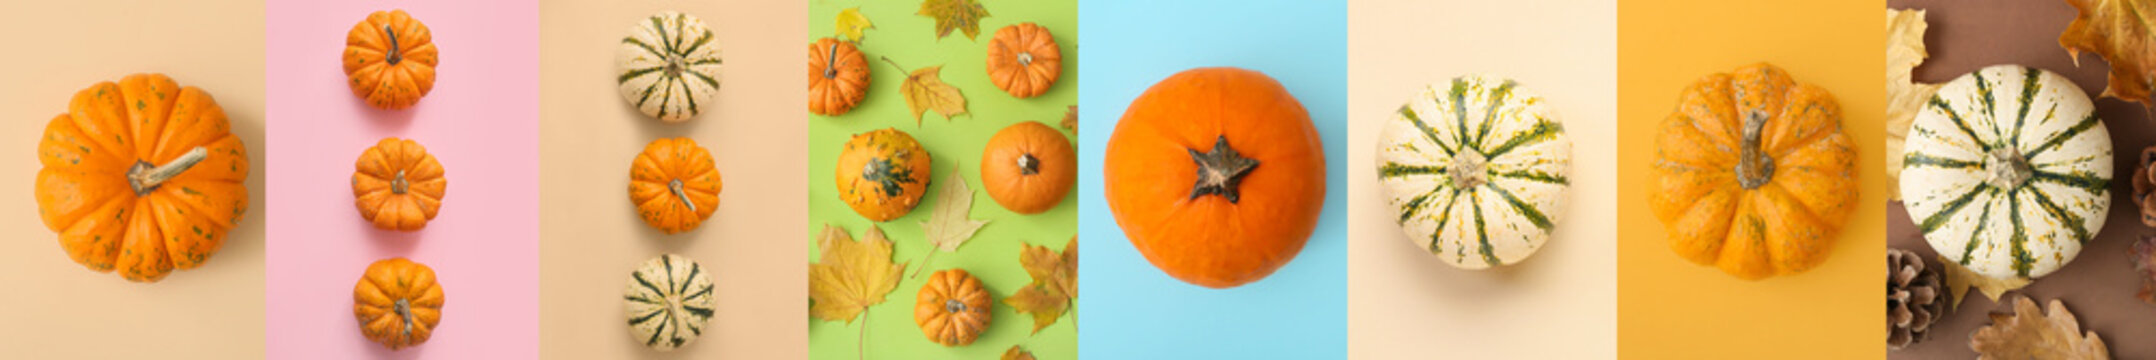 Collection of fresh pumpkins with autumn leaves on color background, top view